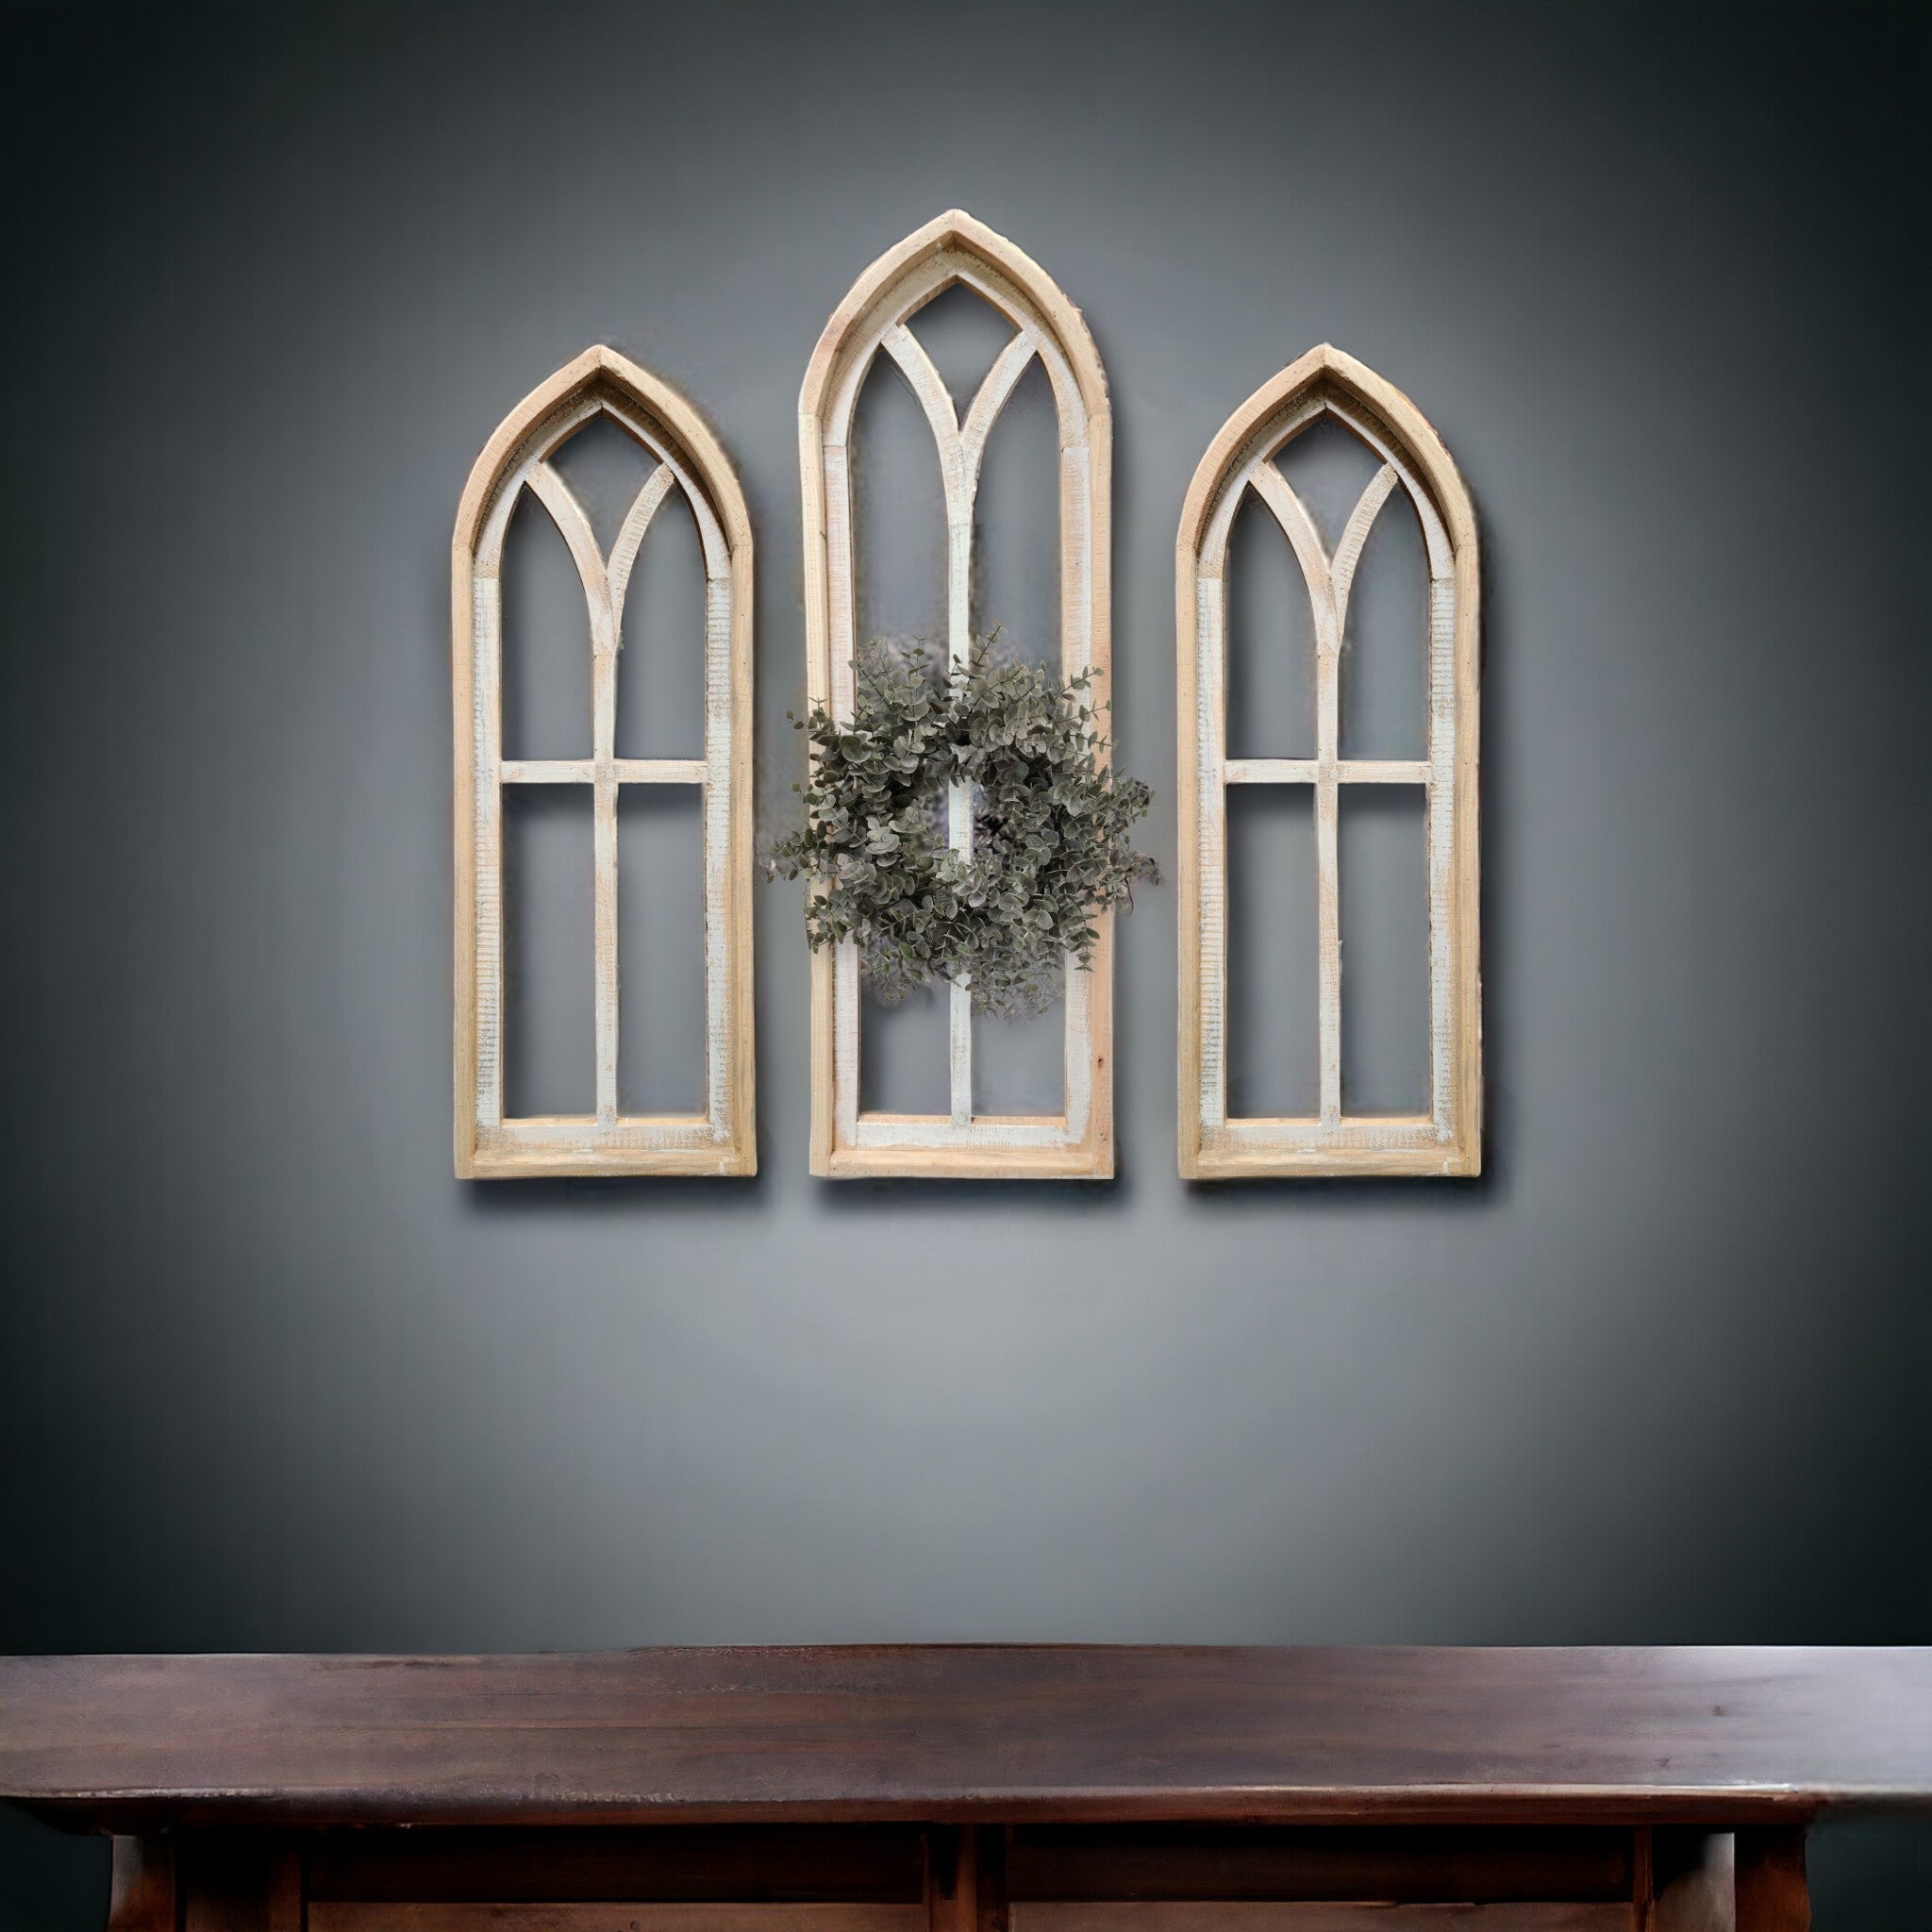 Ivory Point Cathedral Wood Window Collection - Set of 2 Medium Ivory Points + 1 Large Ivory Point  Rustic Cathedral